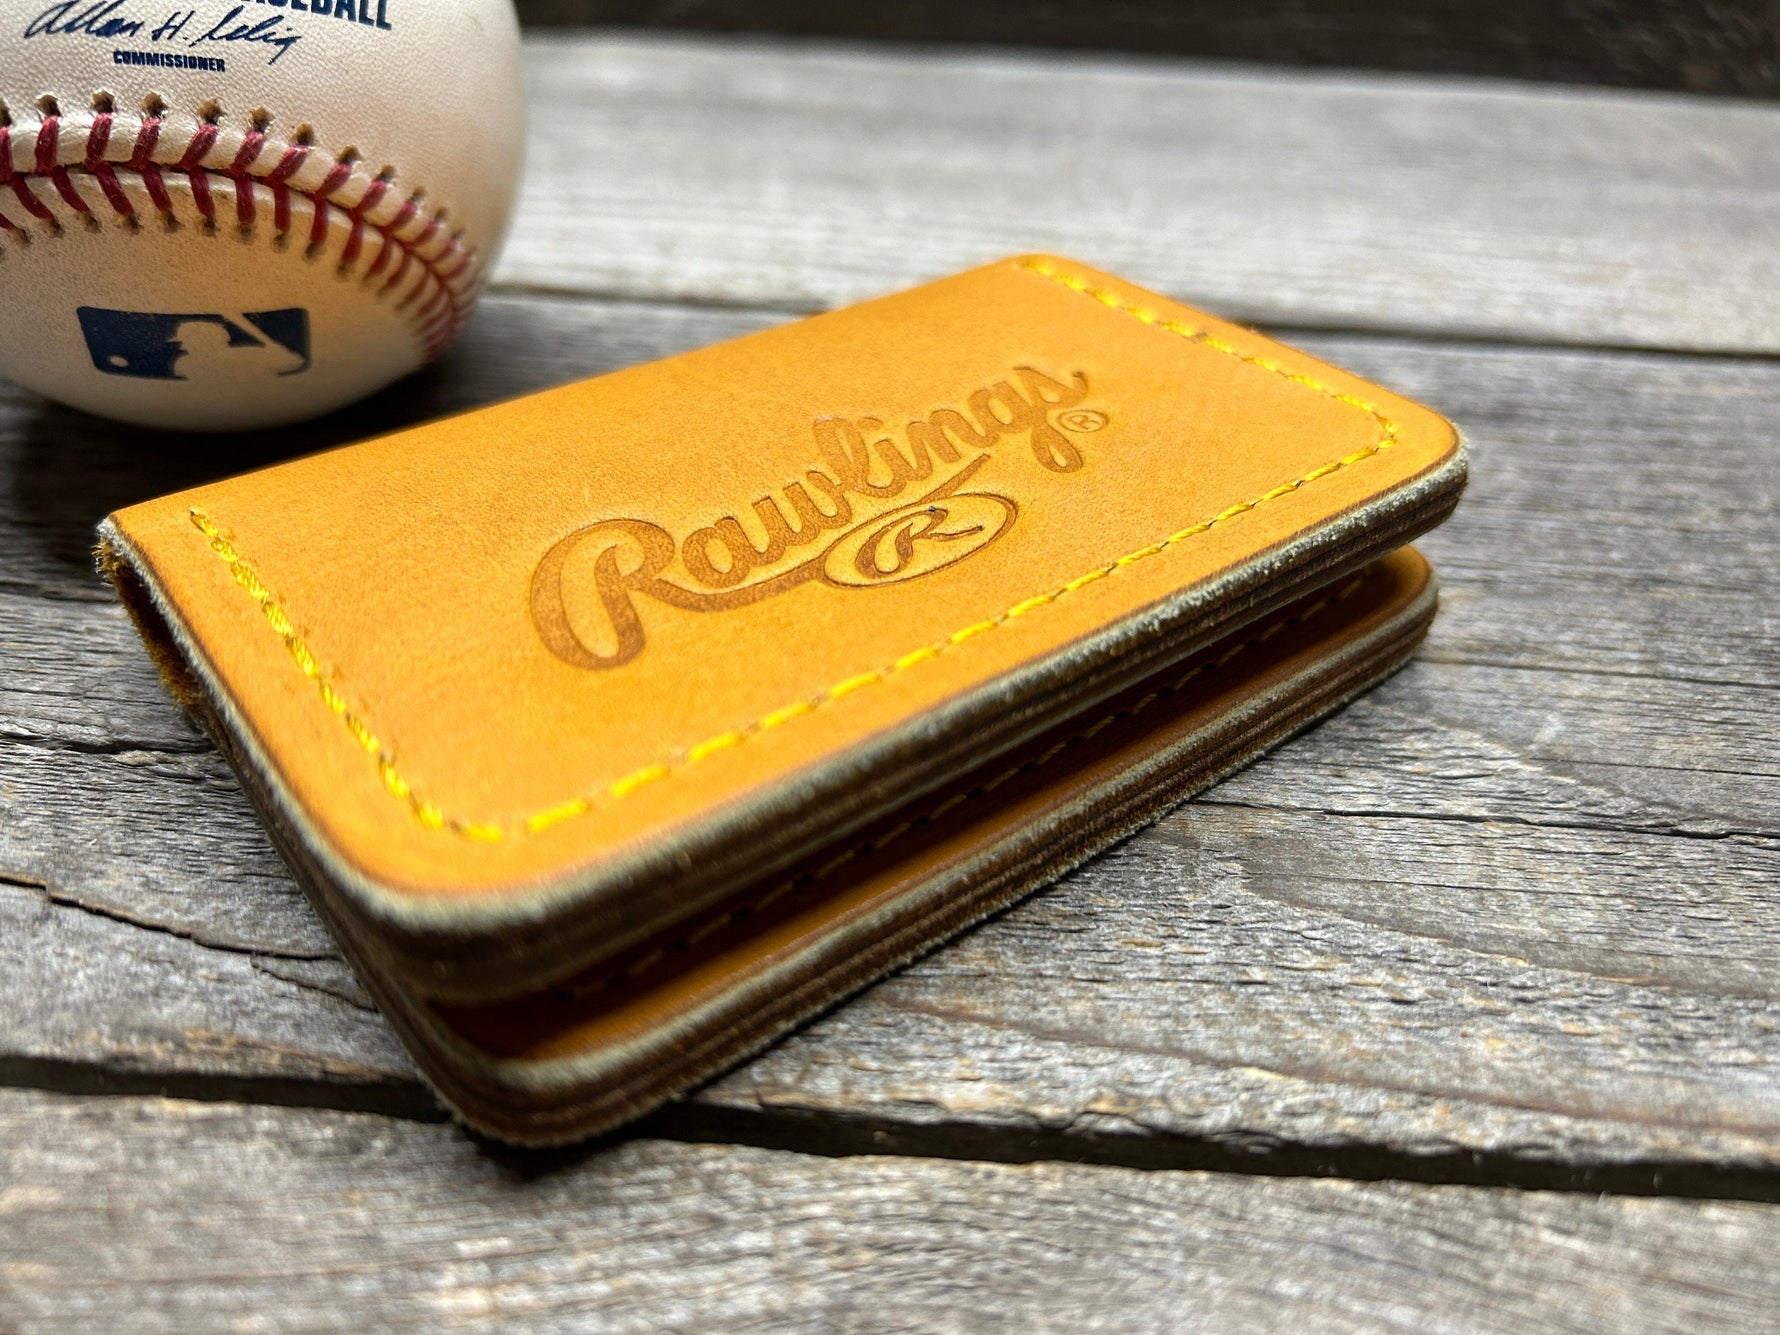 CLEARANCE!! Rawlings Heart of the Hide Horween Baseball Glove Wallet!!